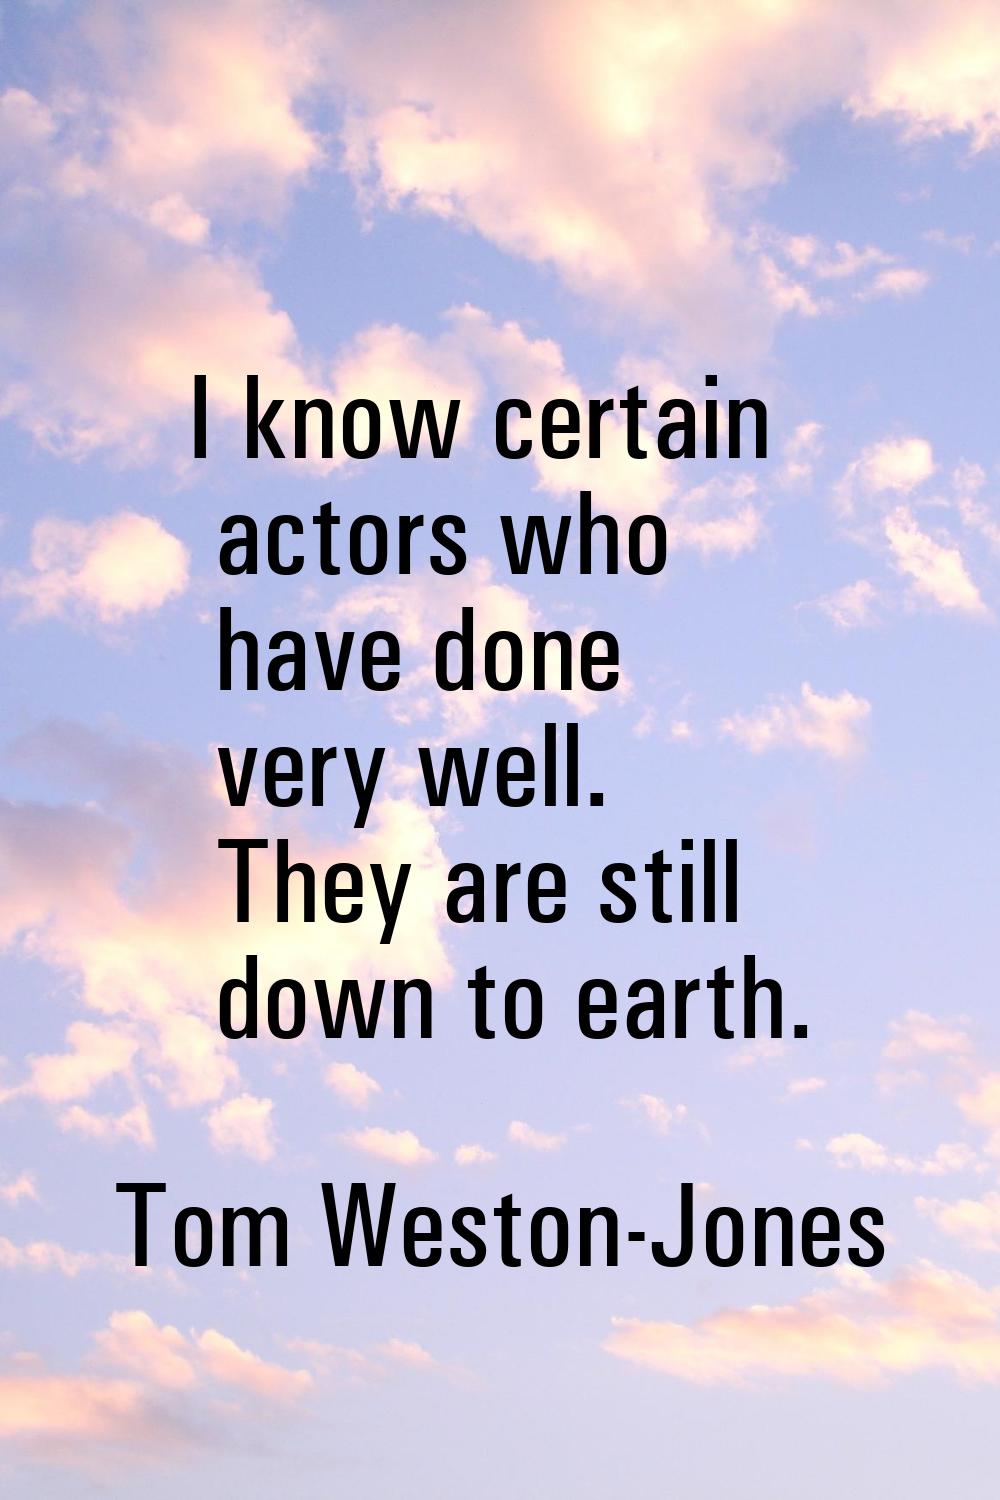 I know certain actors who have done very well. They are still down to earth.